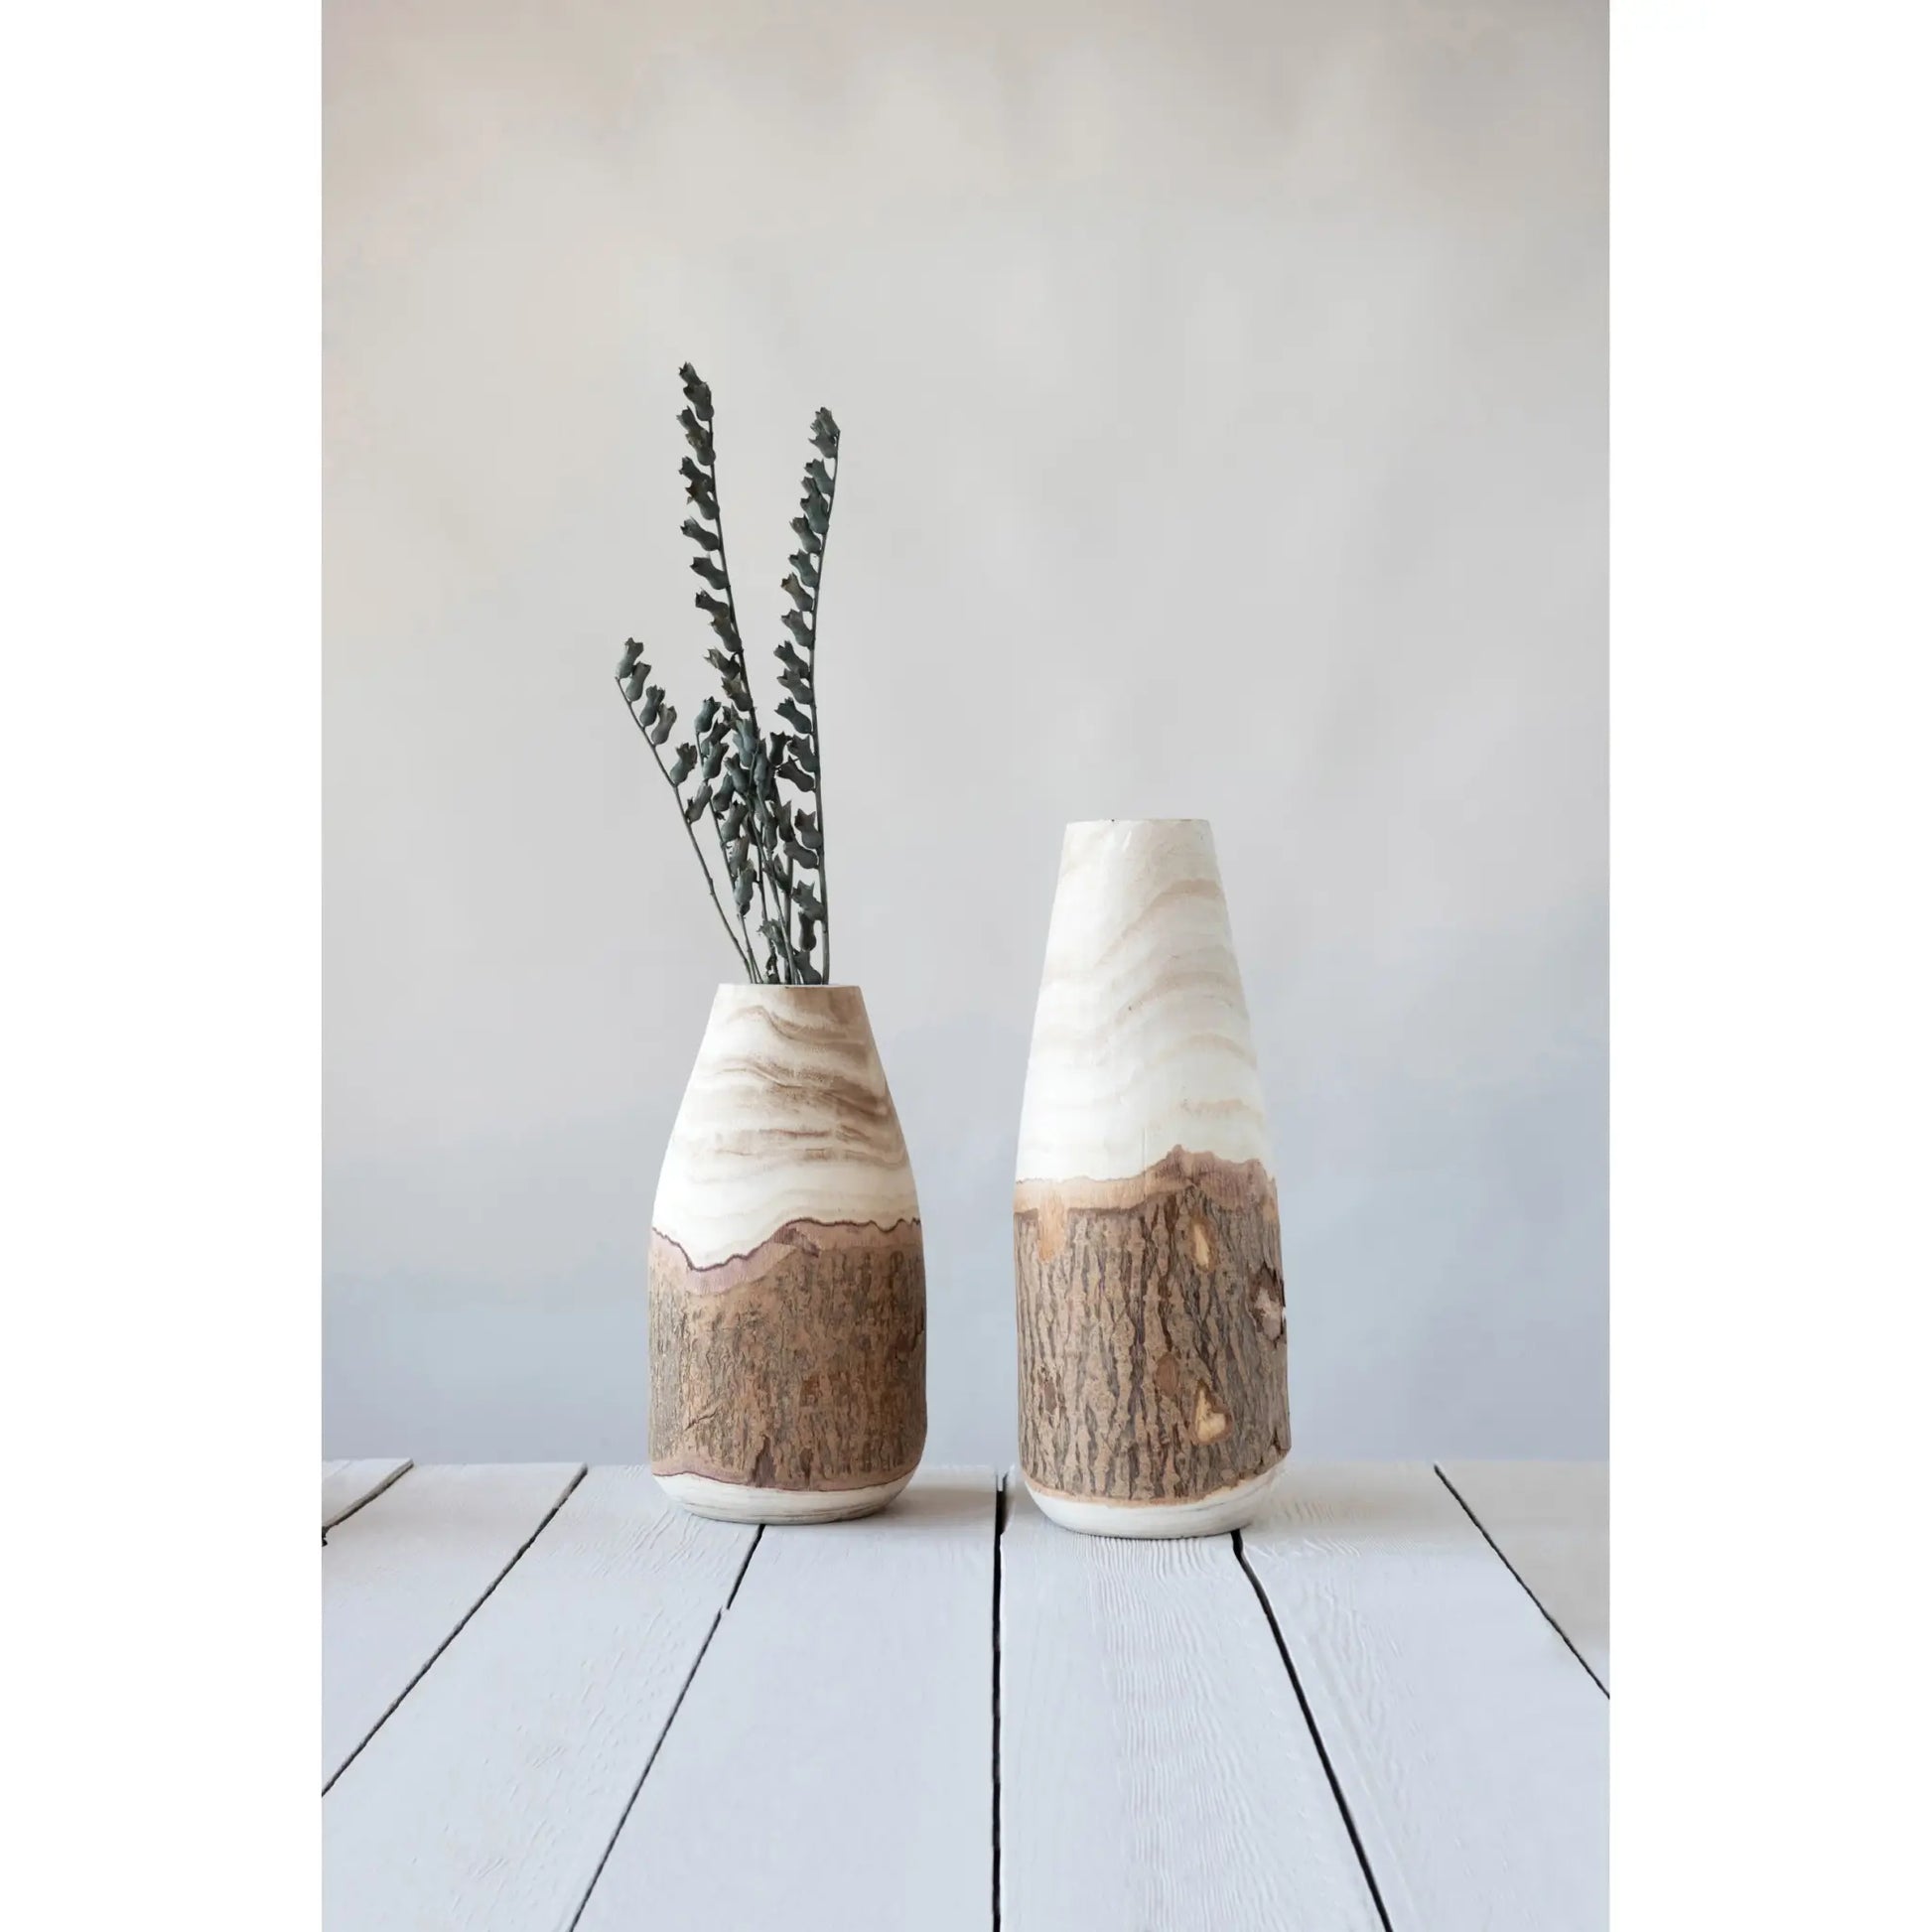 Paulownia Wood Vase w/ Live Edge - Small | Containers | Sunday Night Dinner |  | 